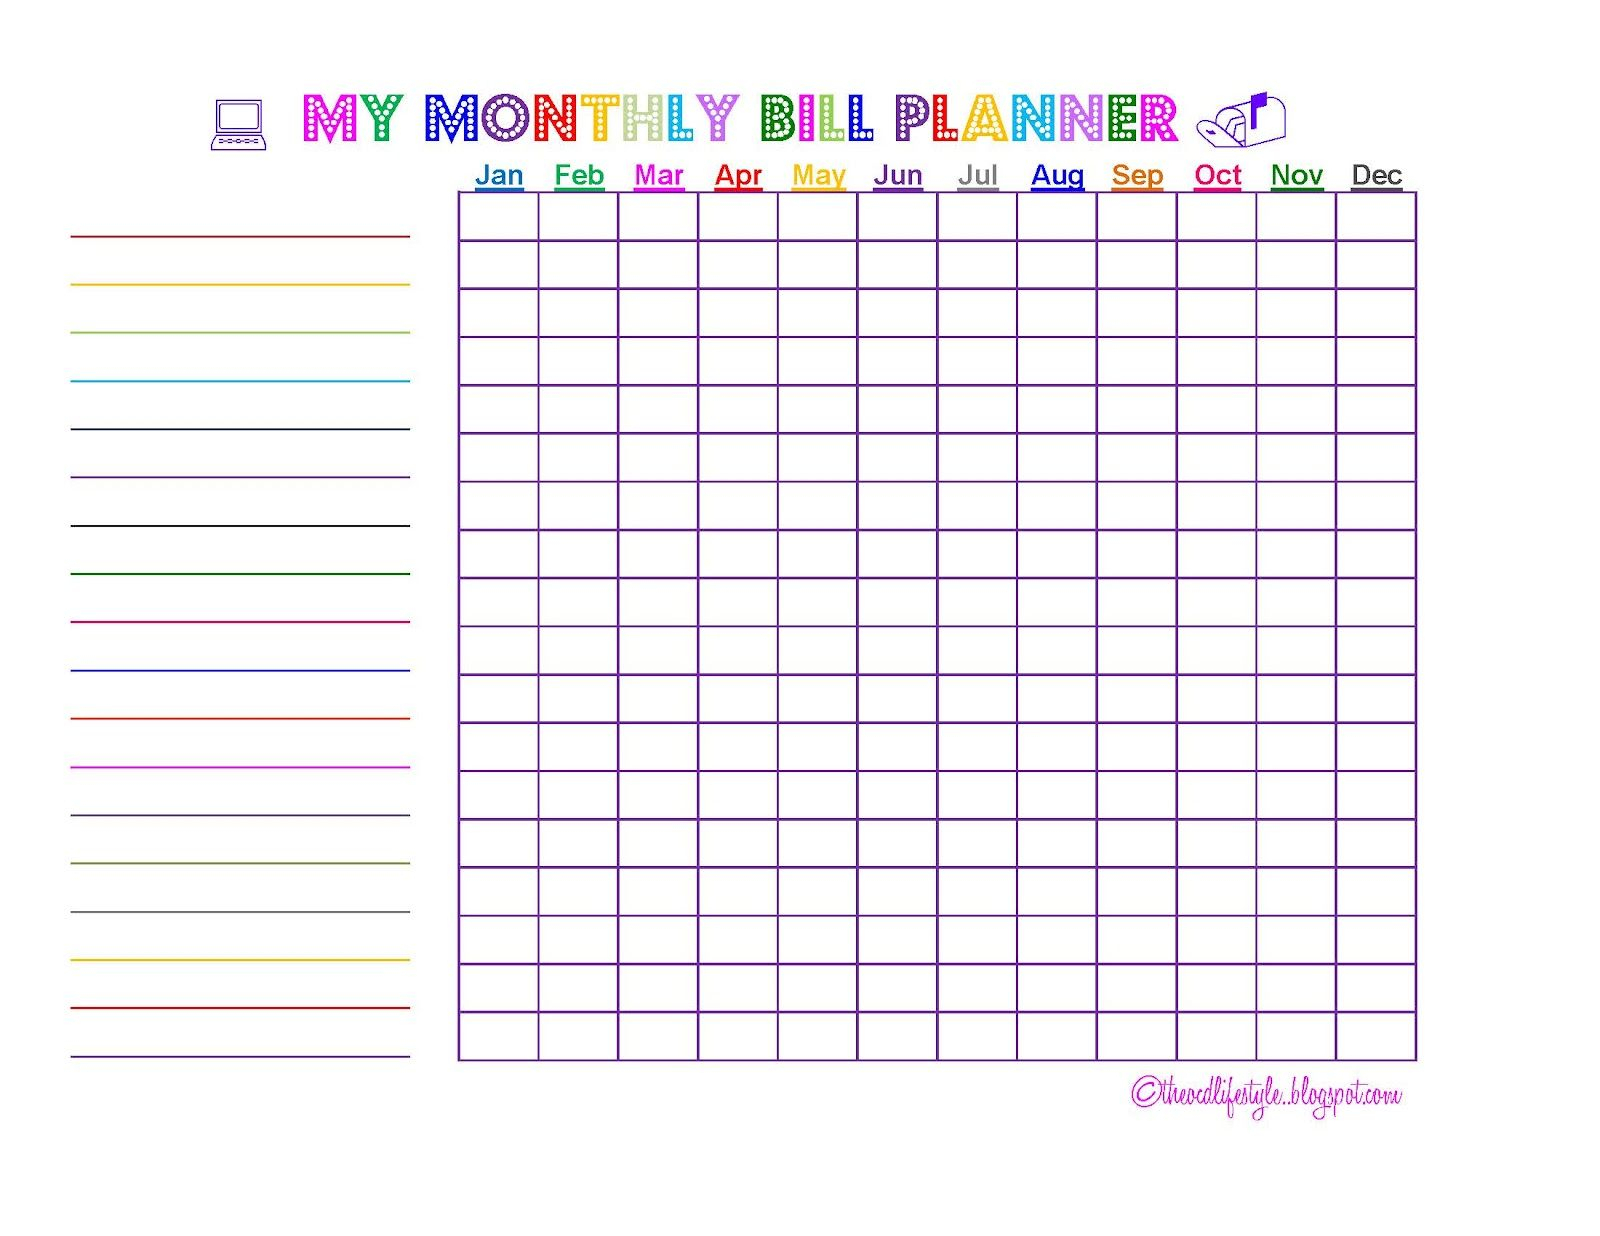 Free Monthly Bill Paying Chart Printable | Bill Planner with regard to Free Printable Monthly Bill Chart